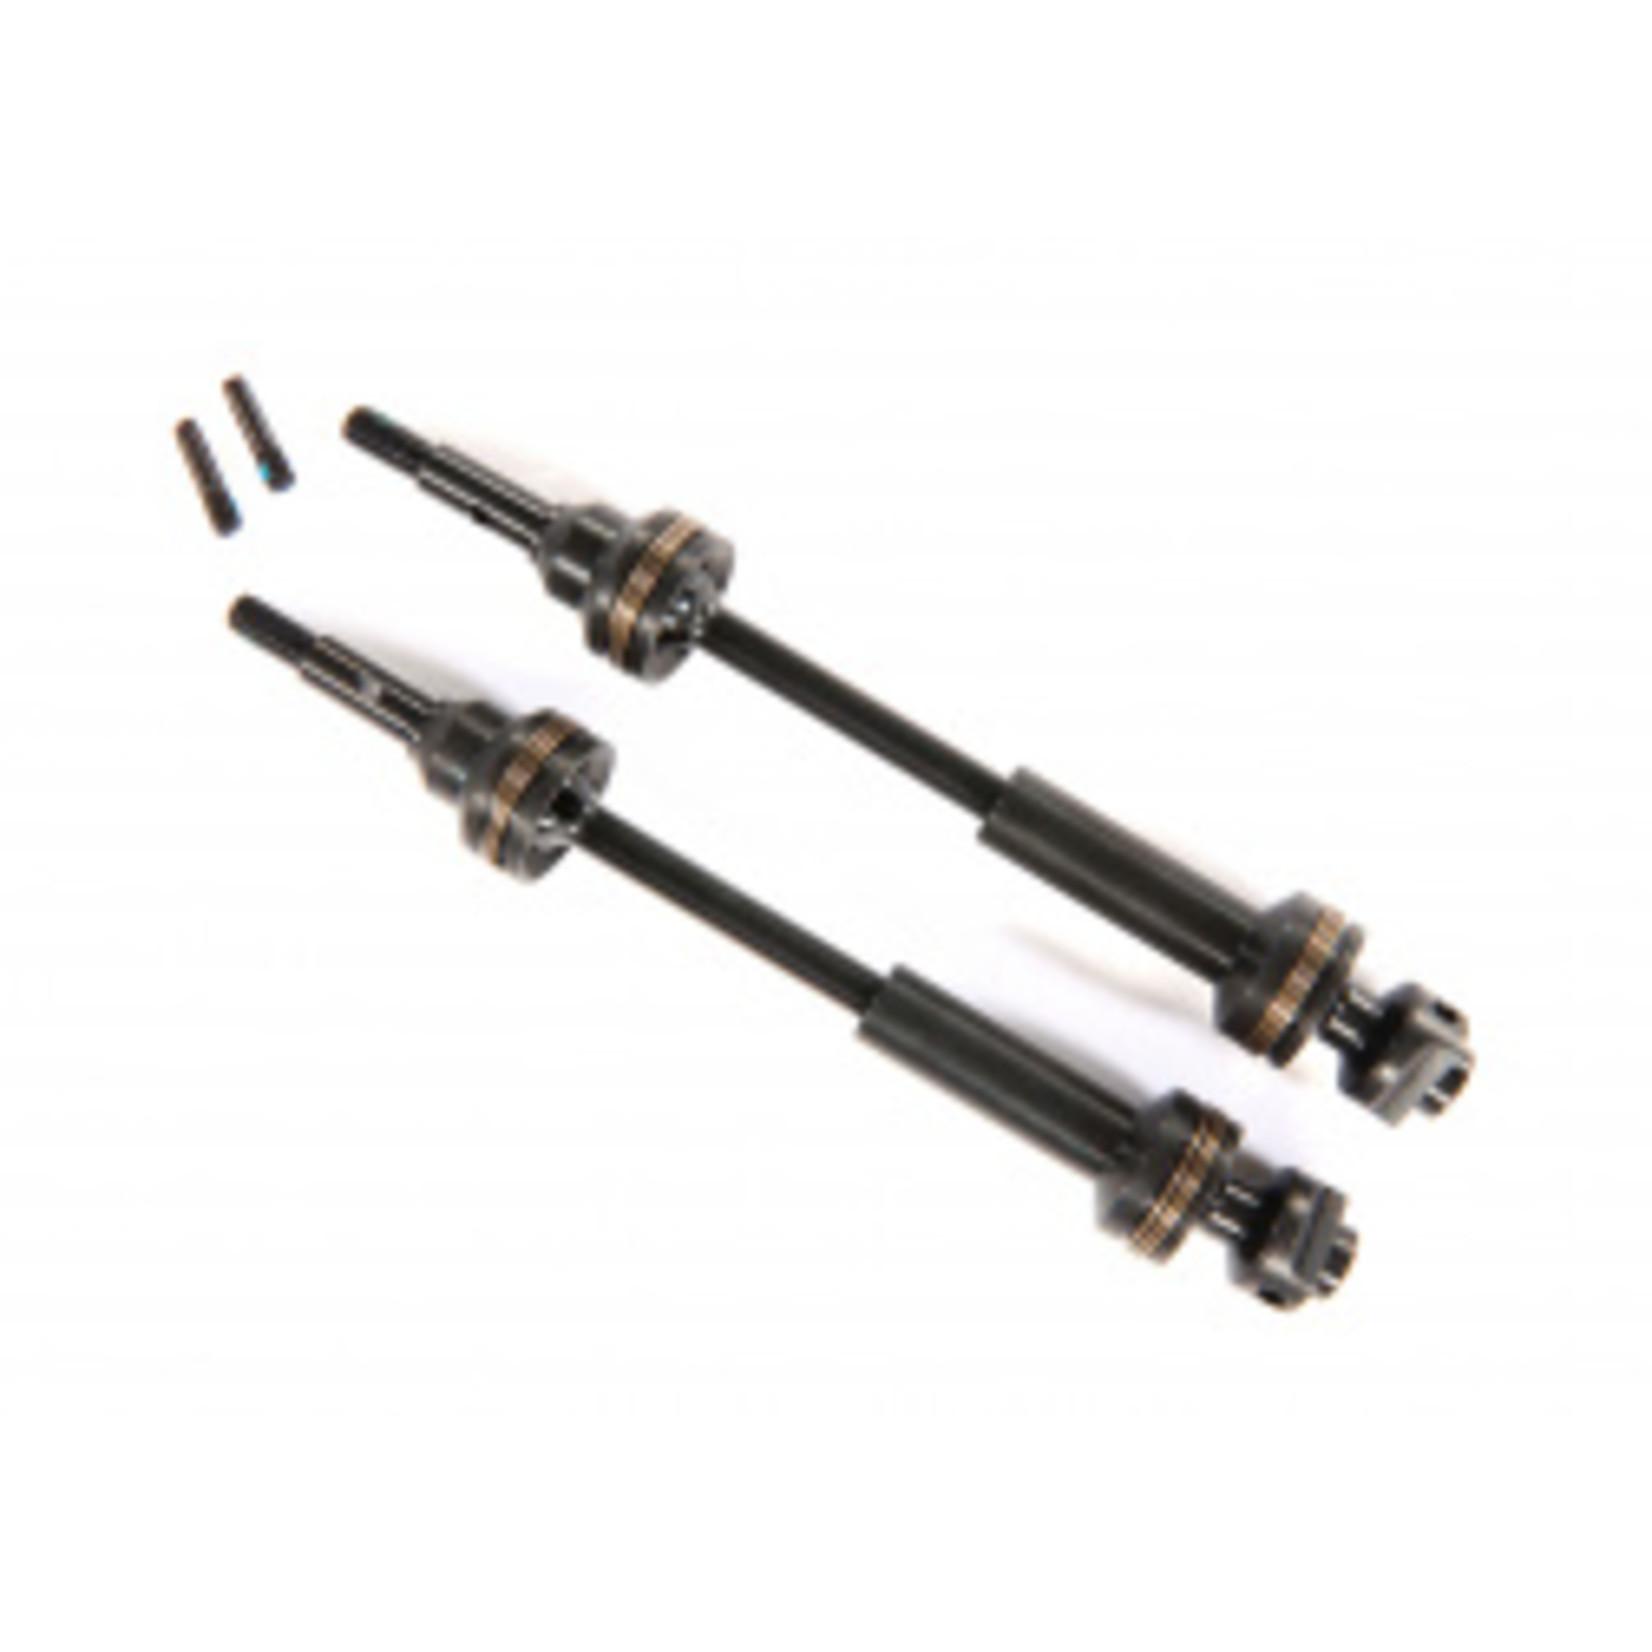 Traxxas Driveshafts, front, steel-spline constant-velocity (complete assembly) (2)